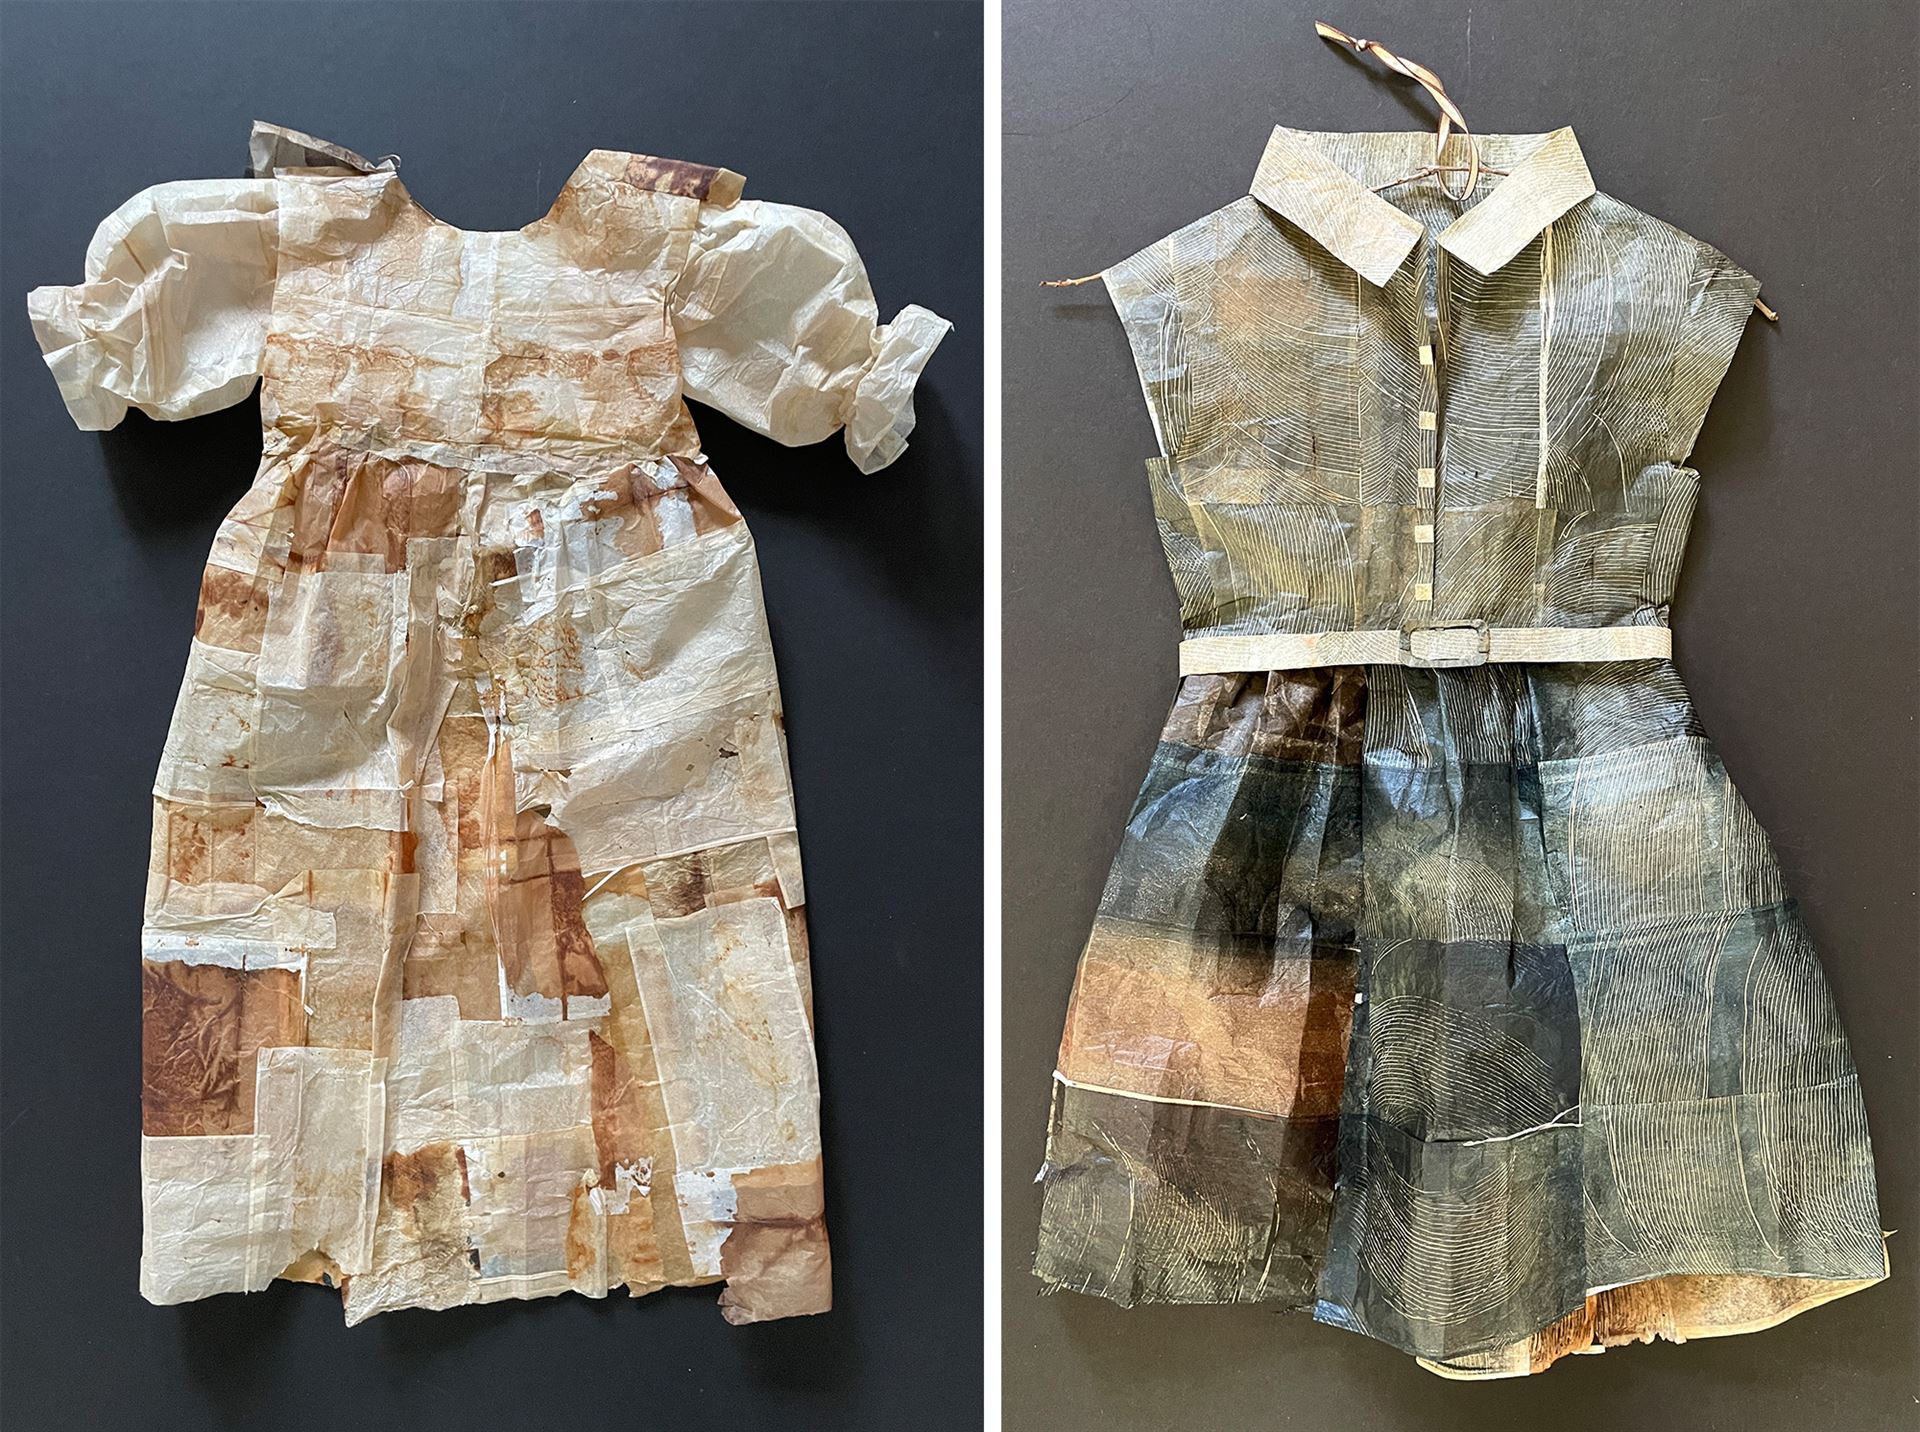 Two dresses made out of tea bags.